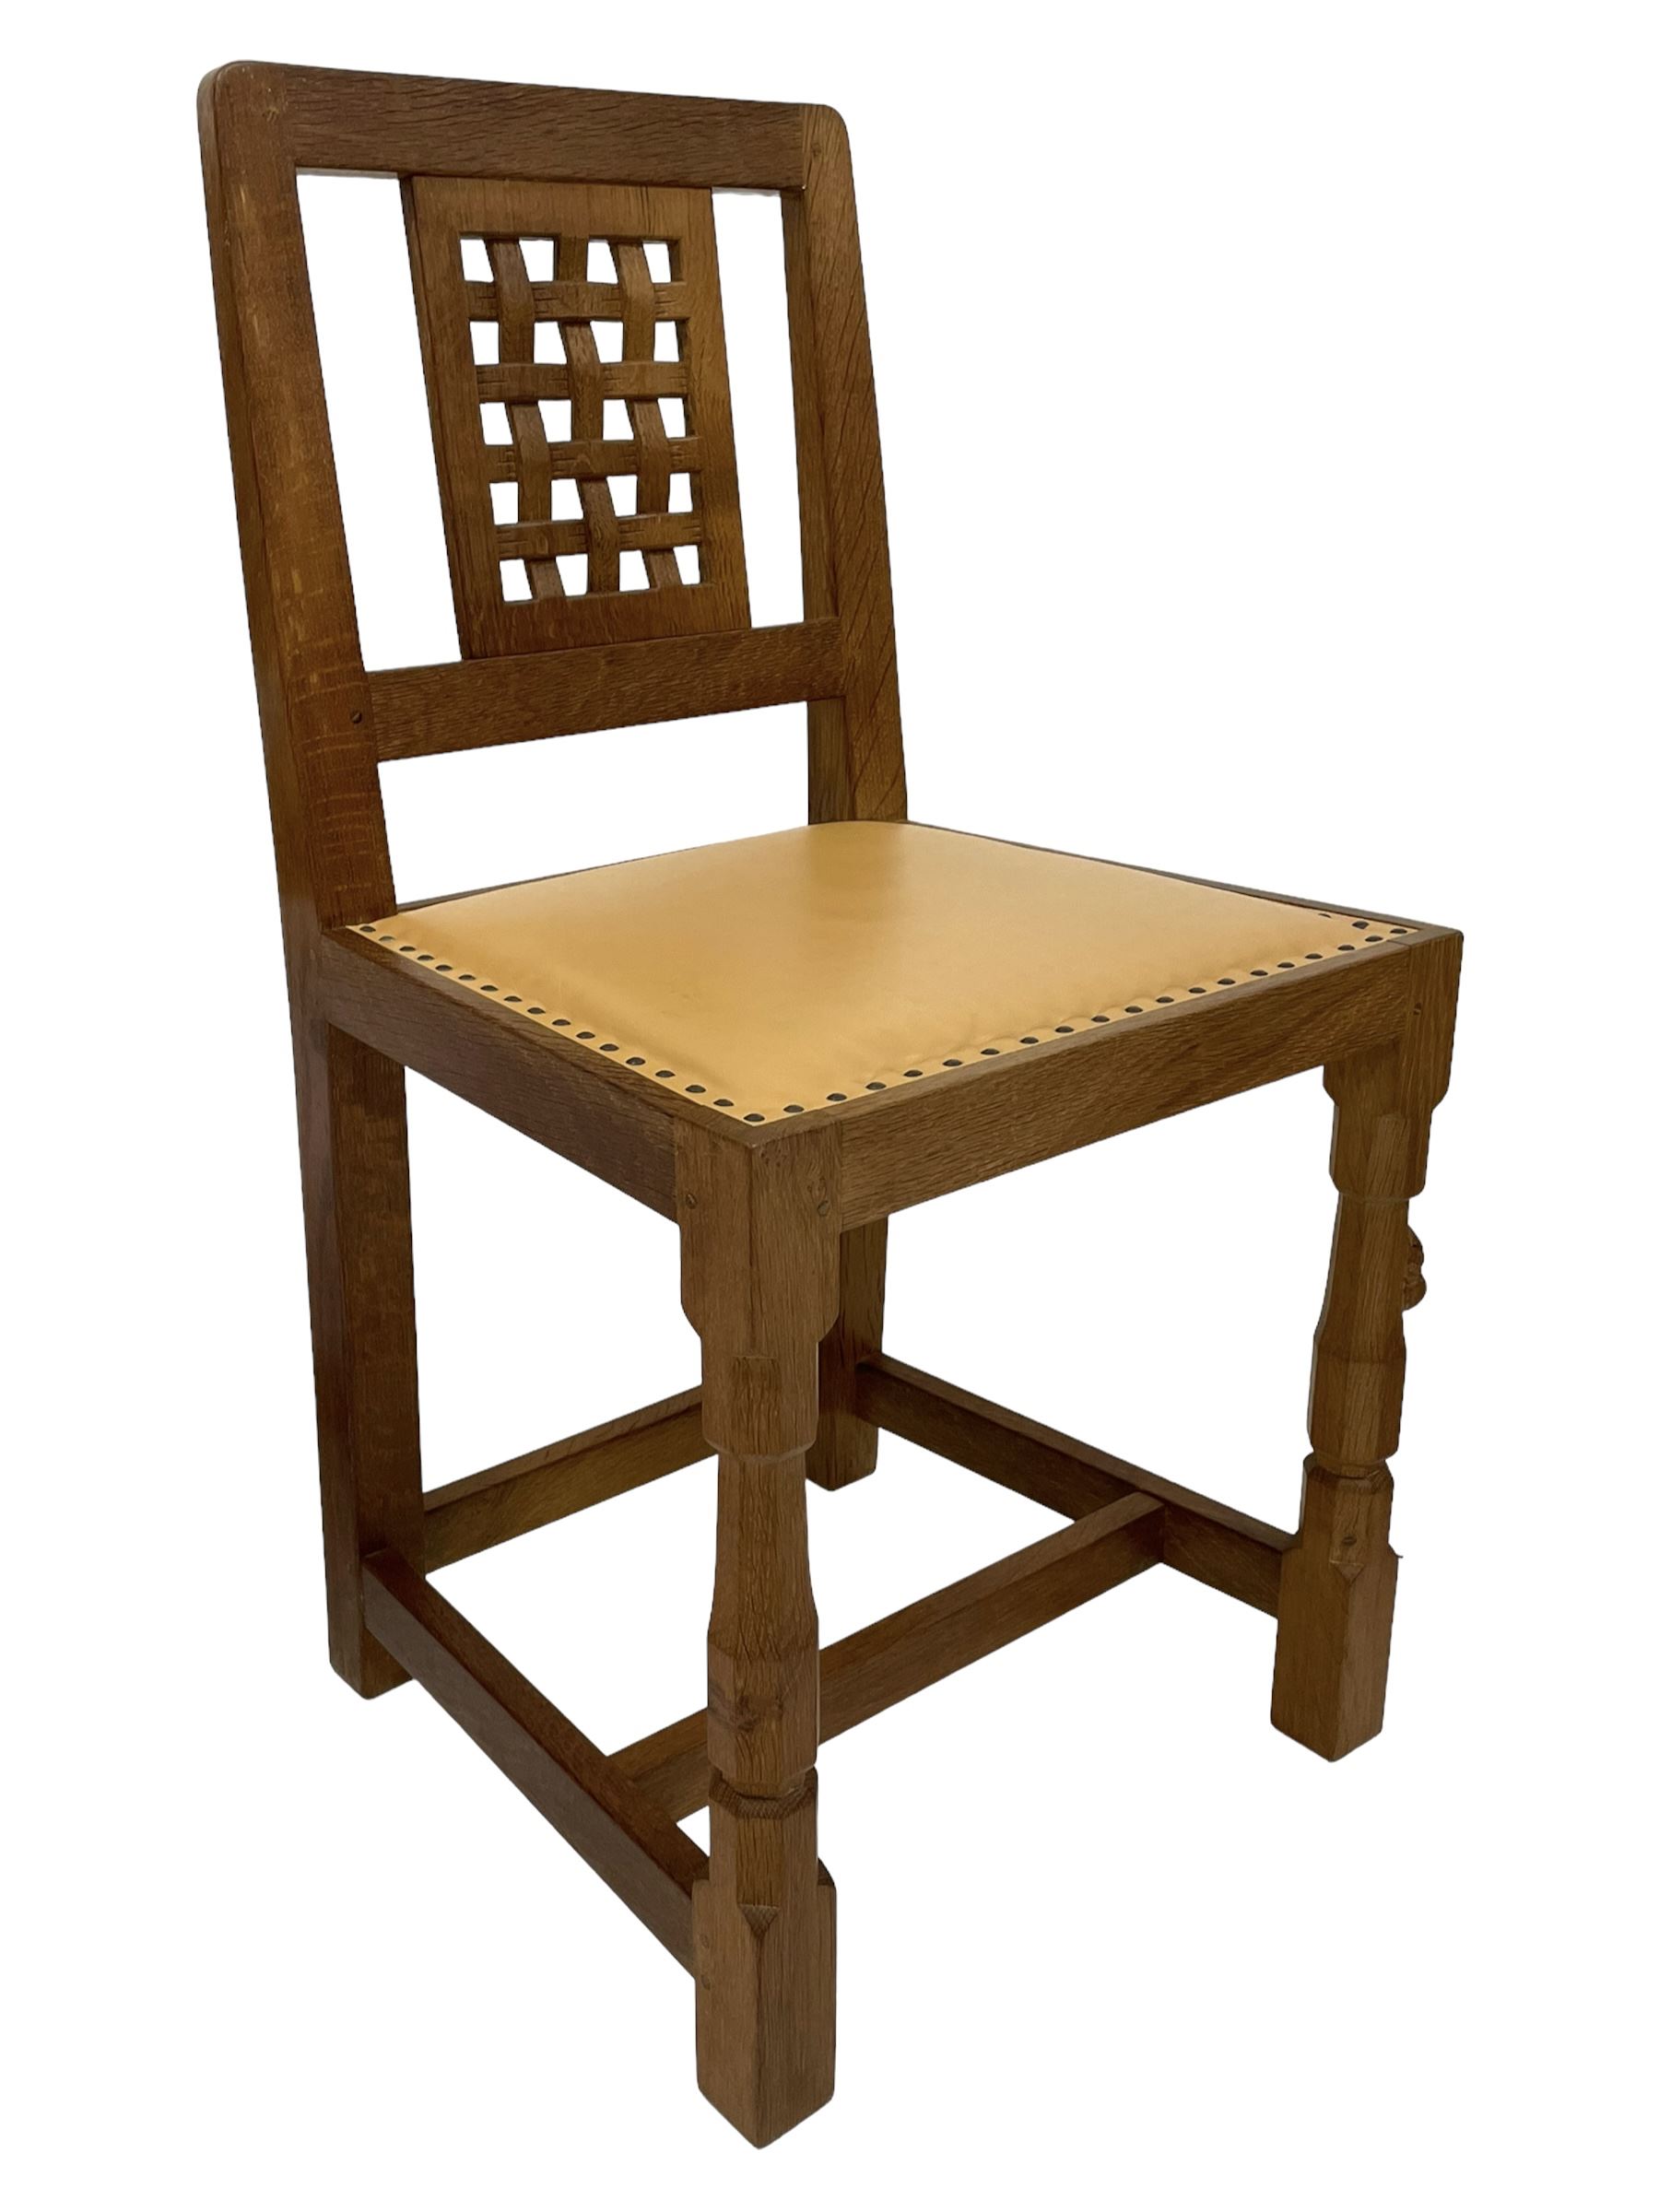 Mouseman - set four oak dining chairs - Image 4 of 7